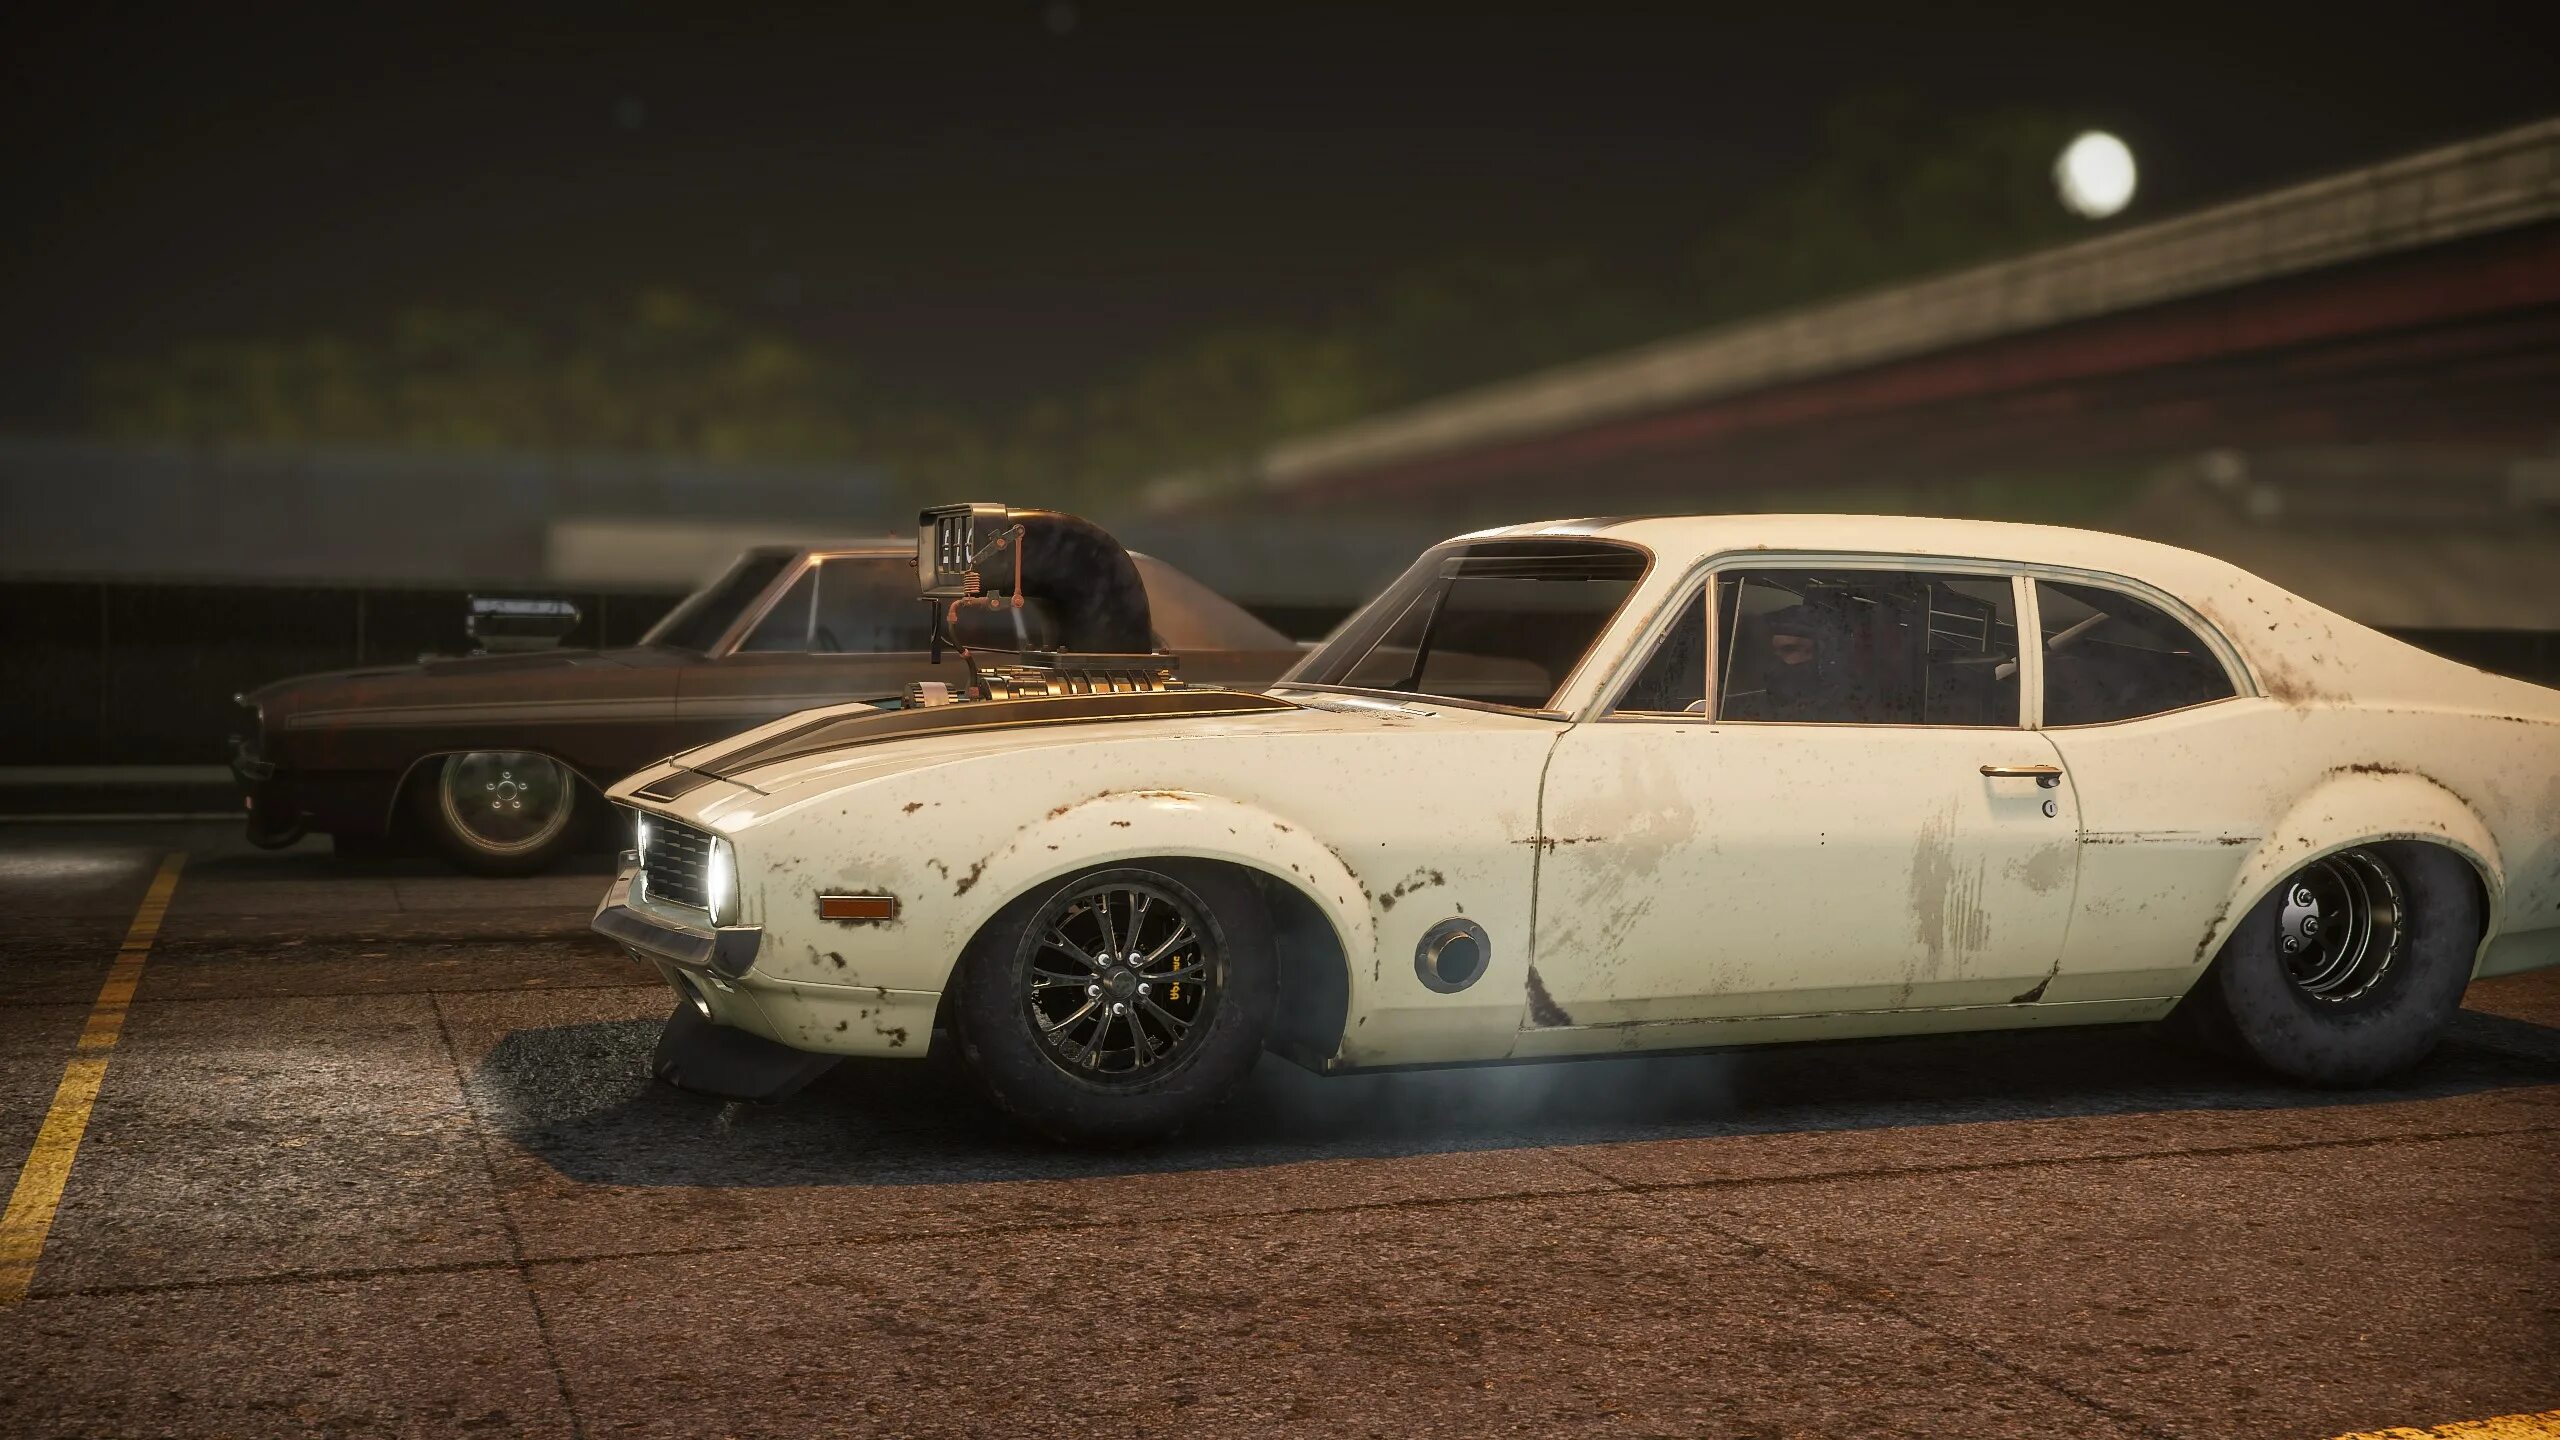 Street Outlaws игра. Street Outlaws 2. Outlaws стрит машины. Street Outlaws the list (2019). City of outlaws